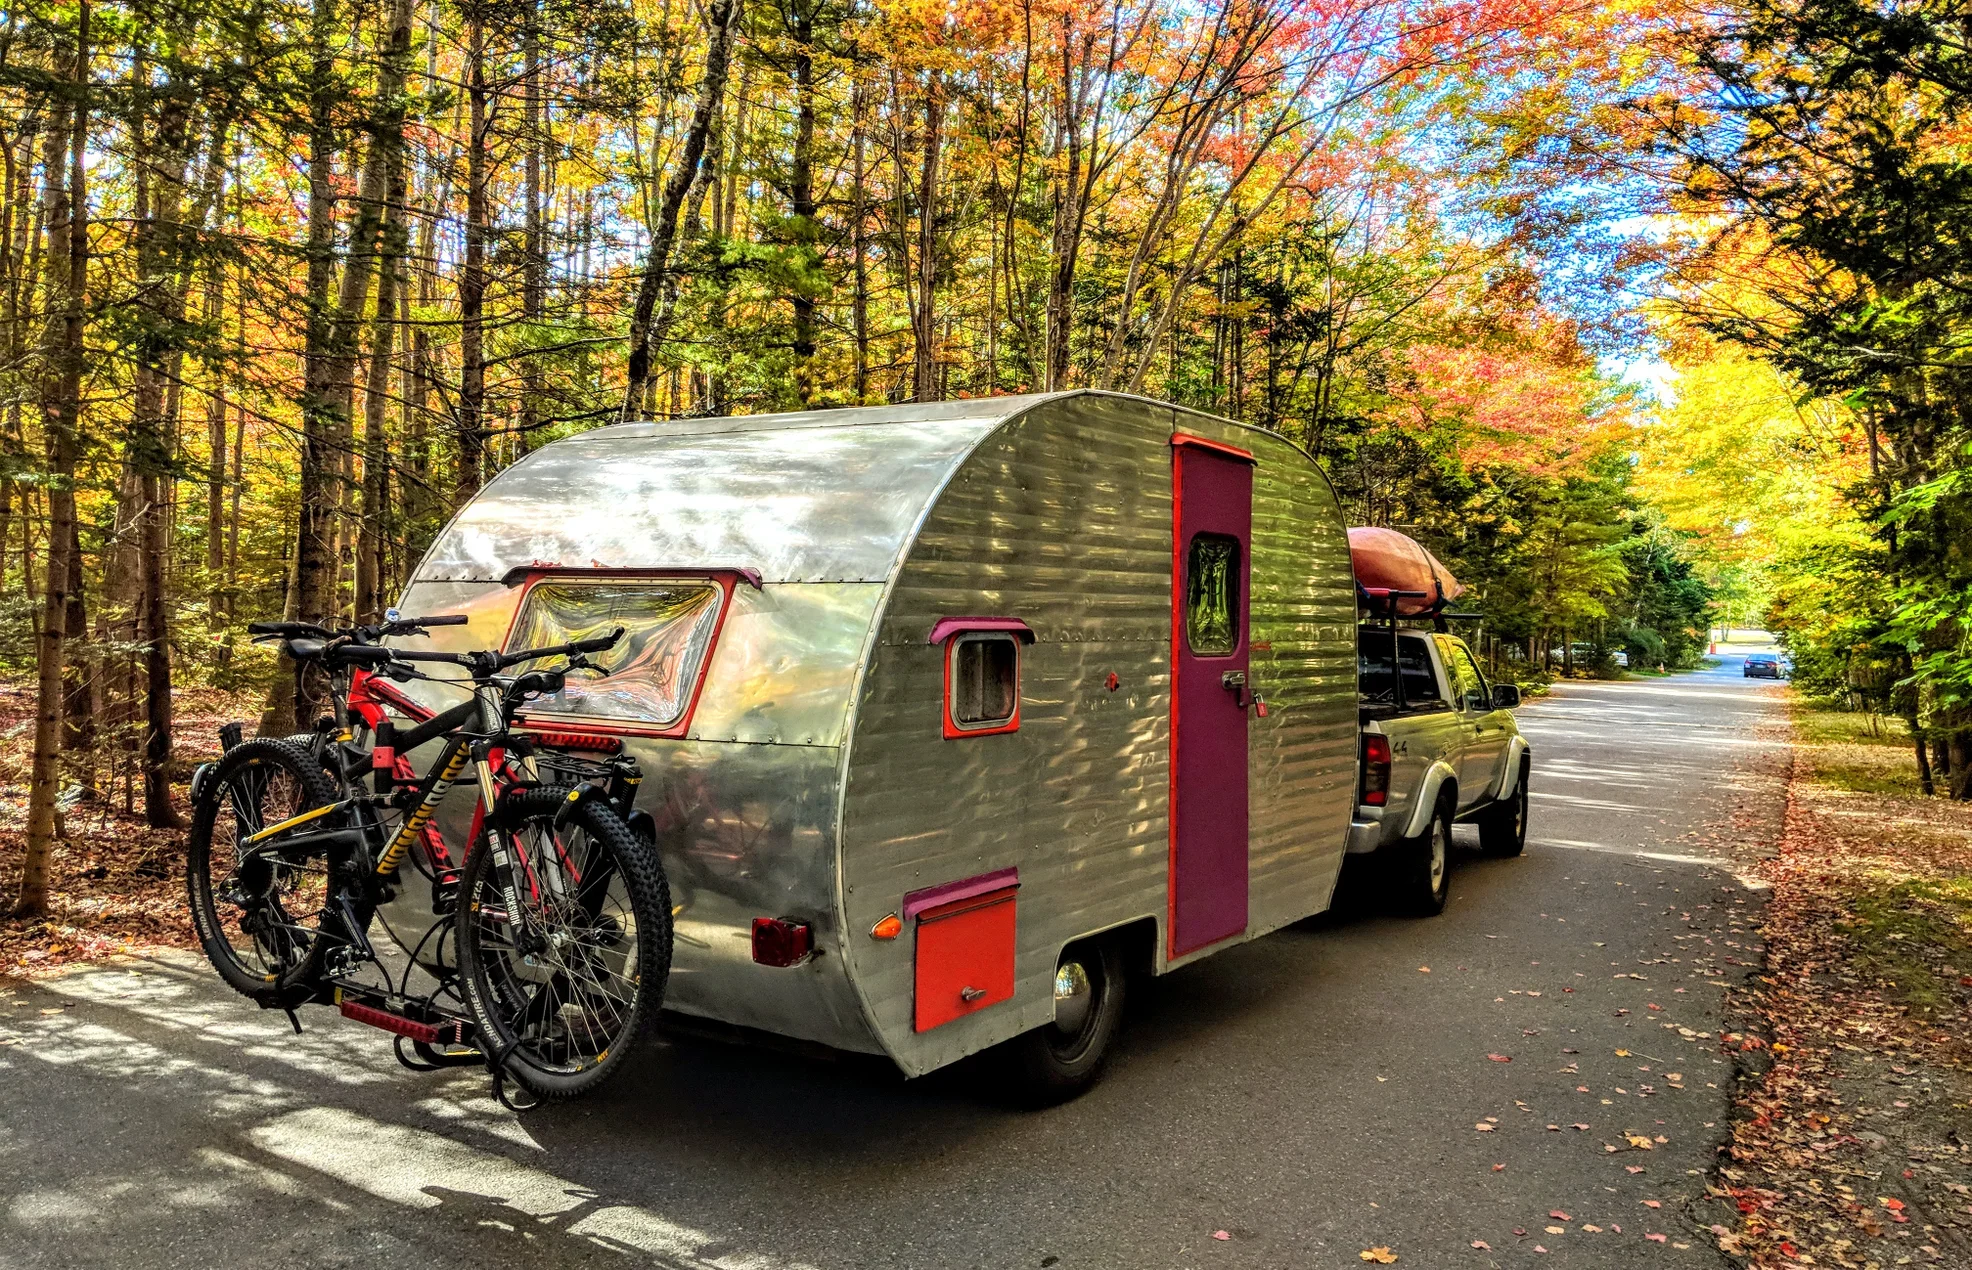 Camping trailer driving into the Bar Harbor Campground through a forest of fall foliage.